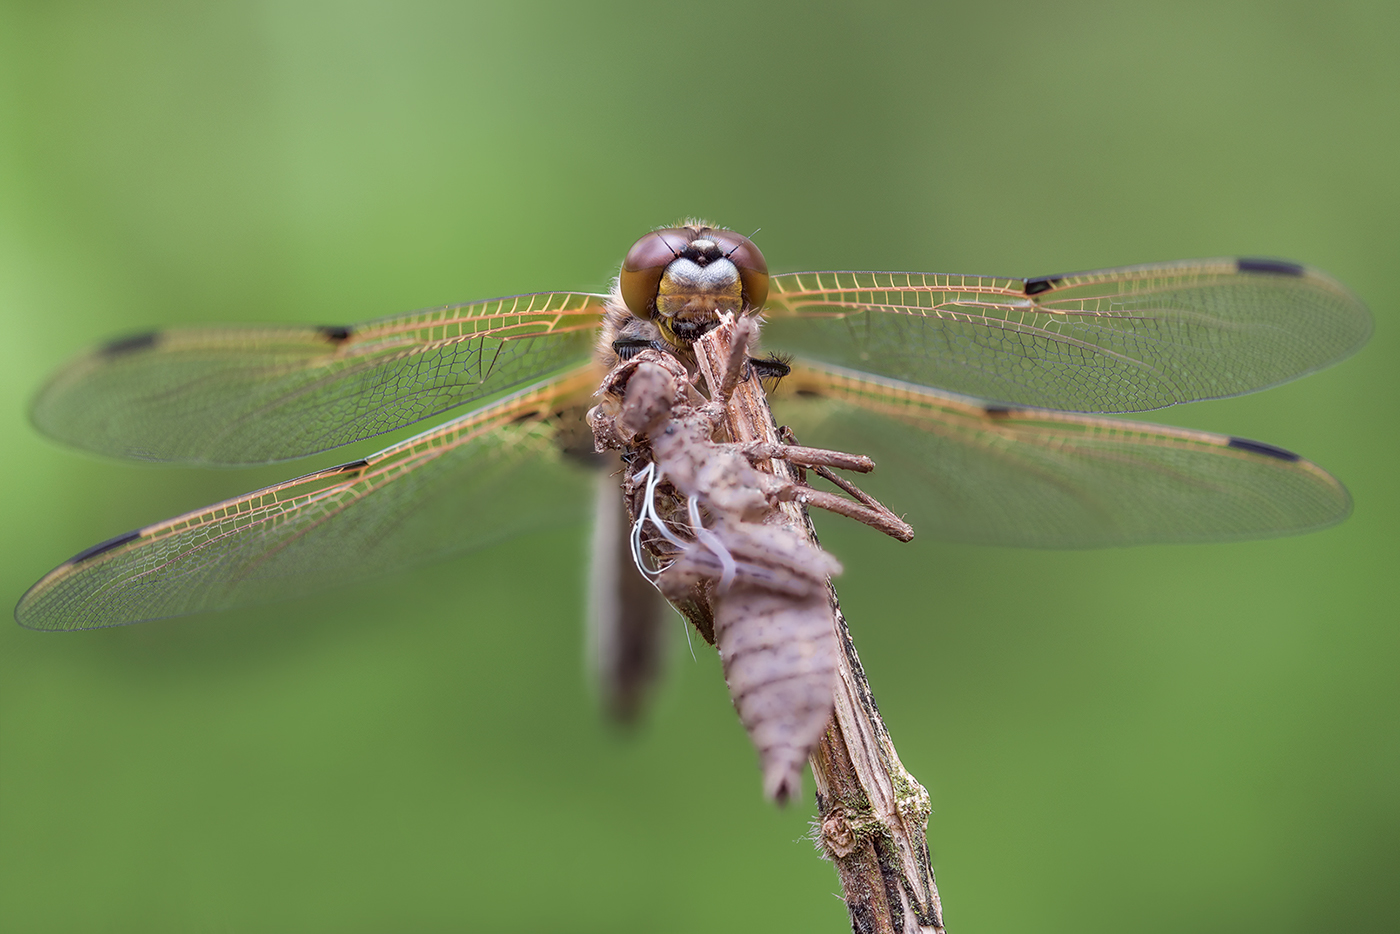 Macro Photography macro Insects dragonfly close up Nature wild life four-spotted chaser Libellula quadrimaculata